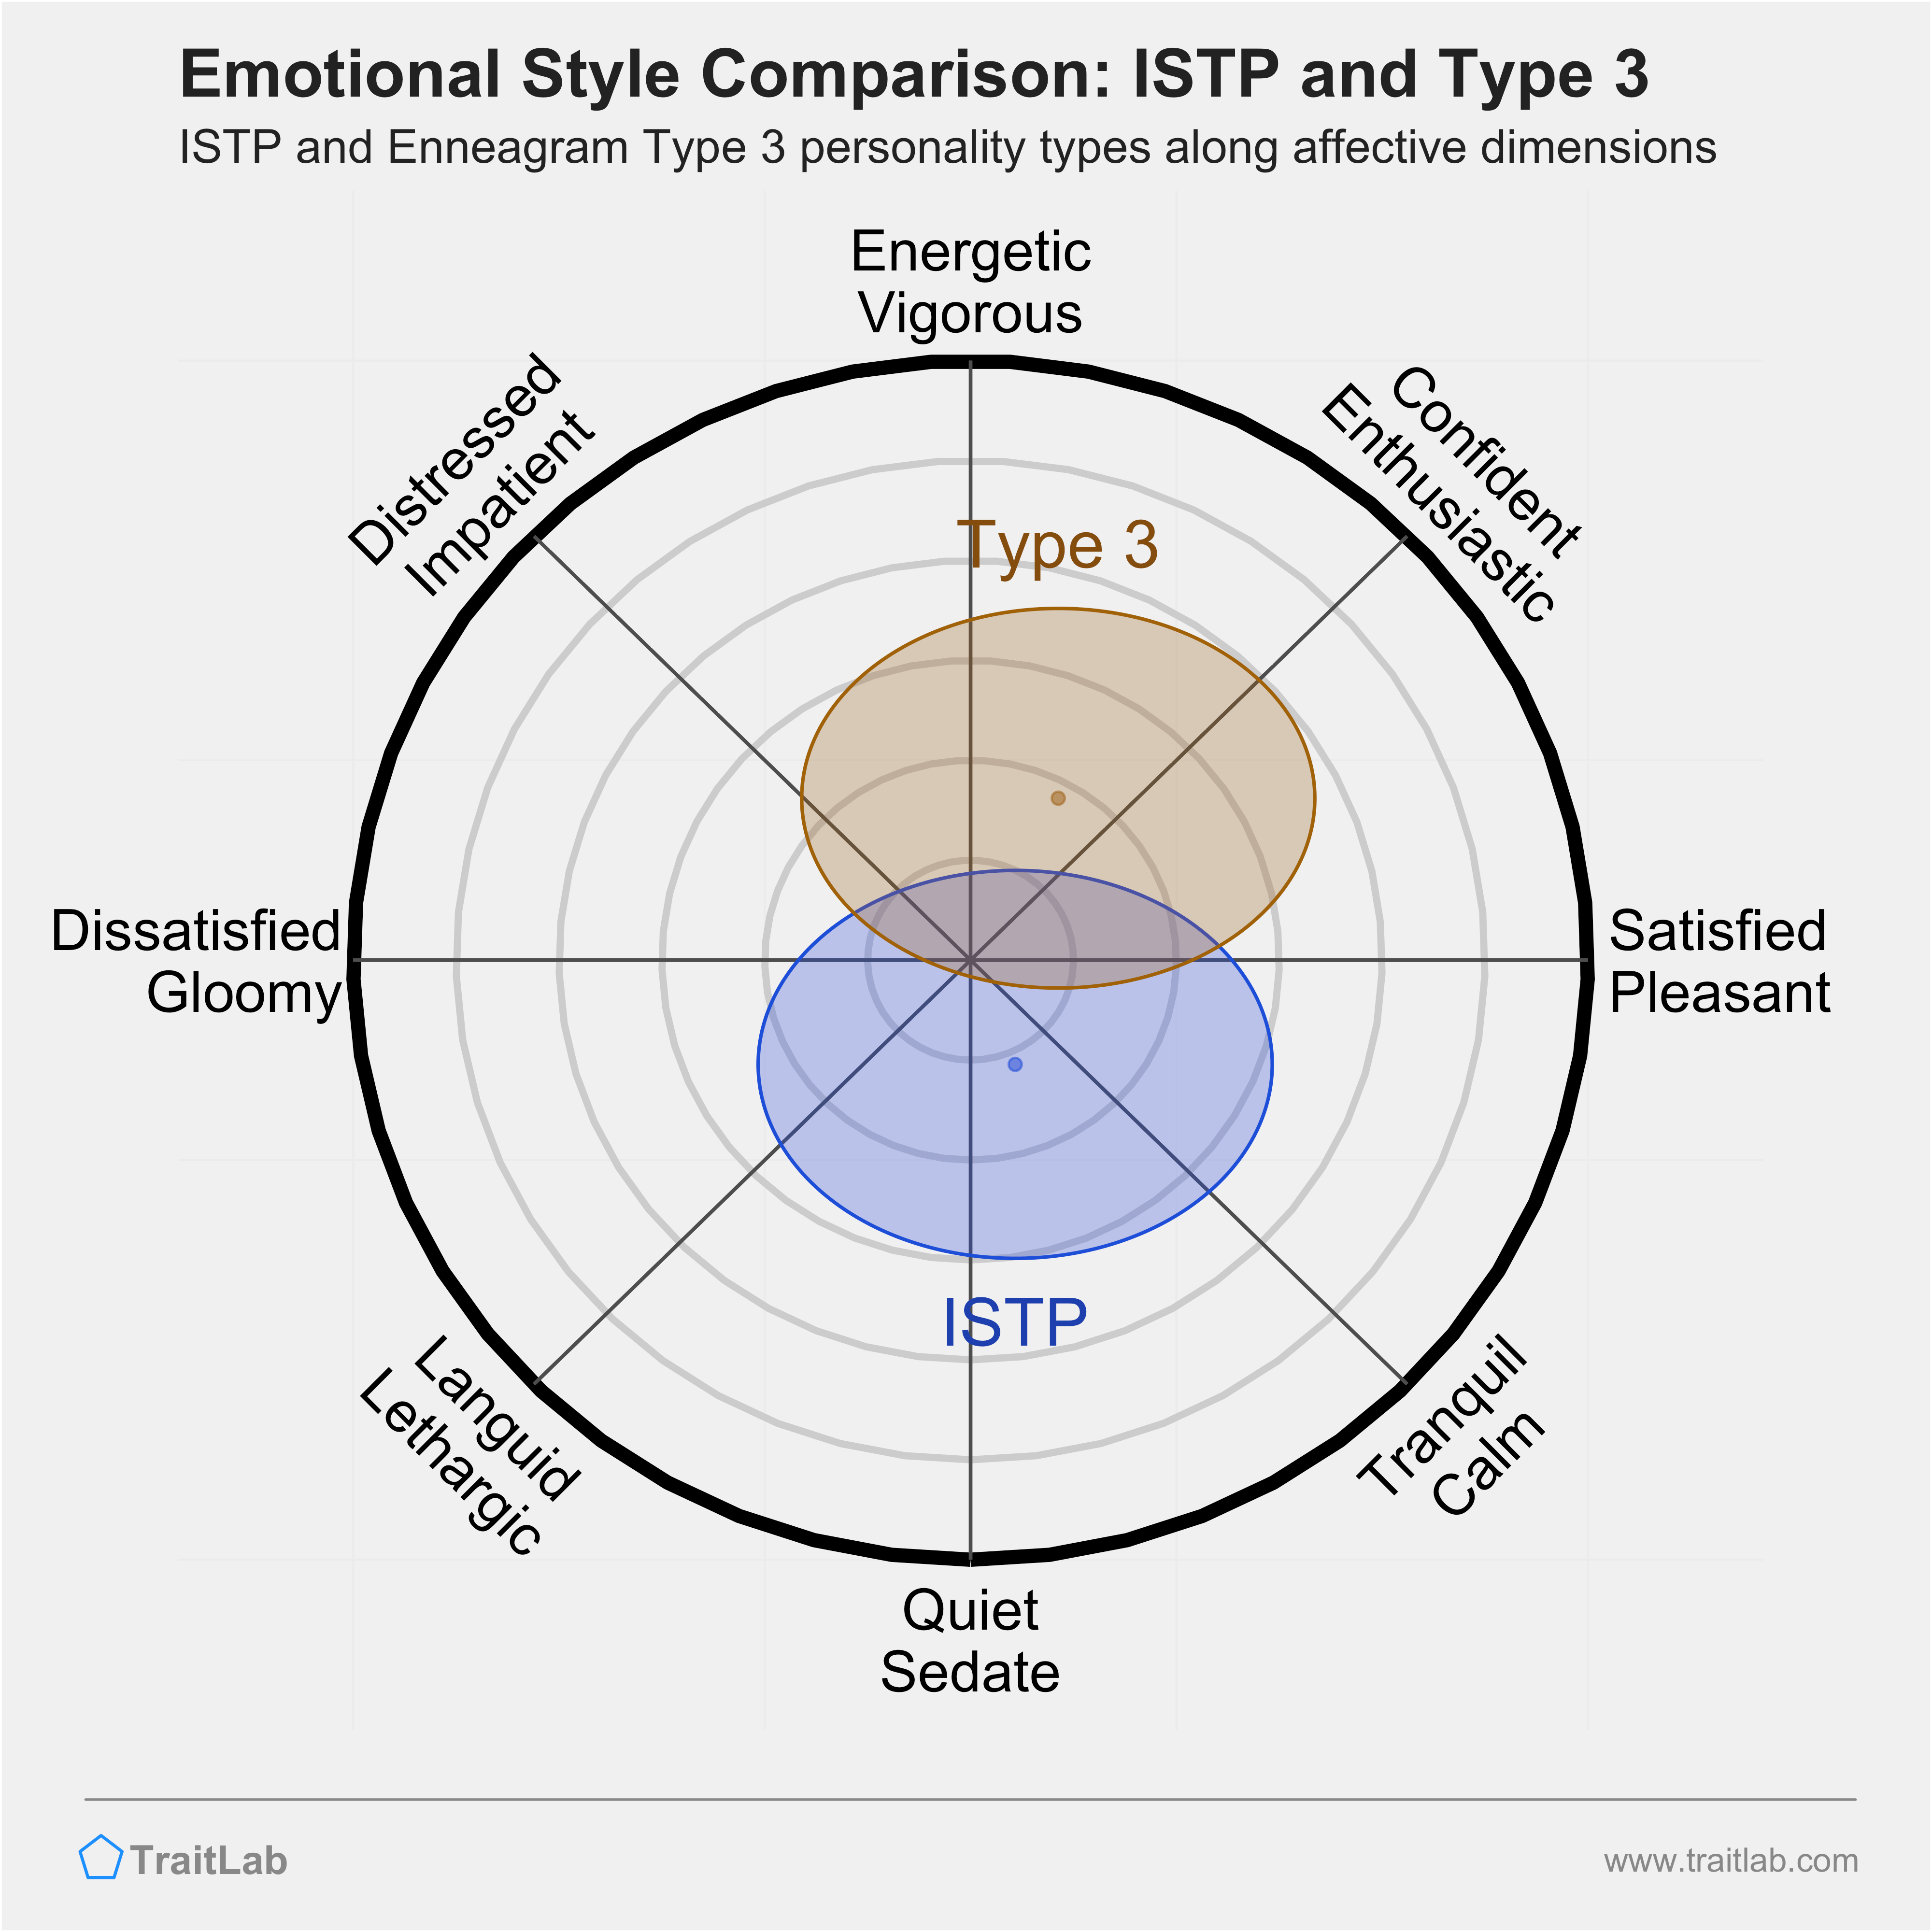 ISTP and Type 3 comparison across emotional (affective) dimensions